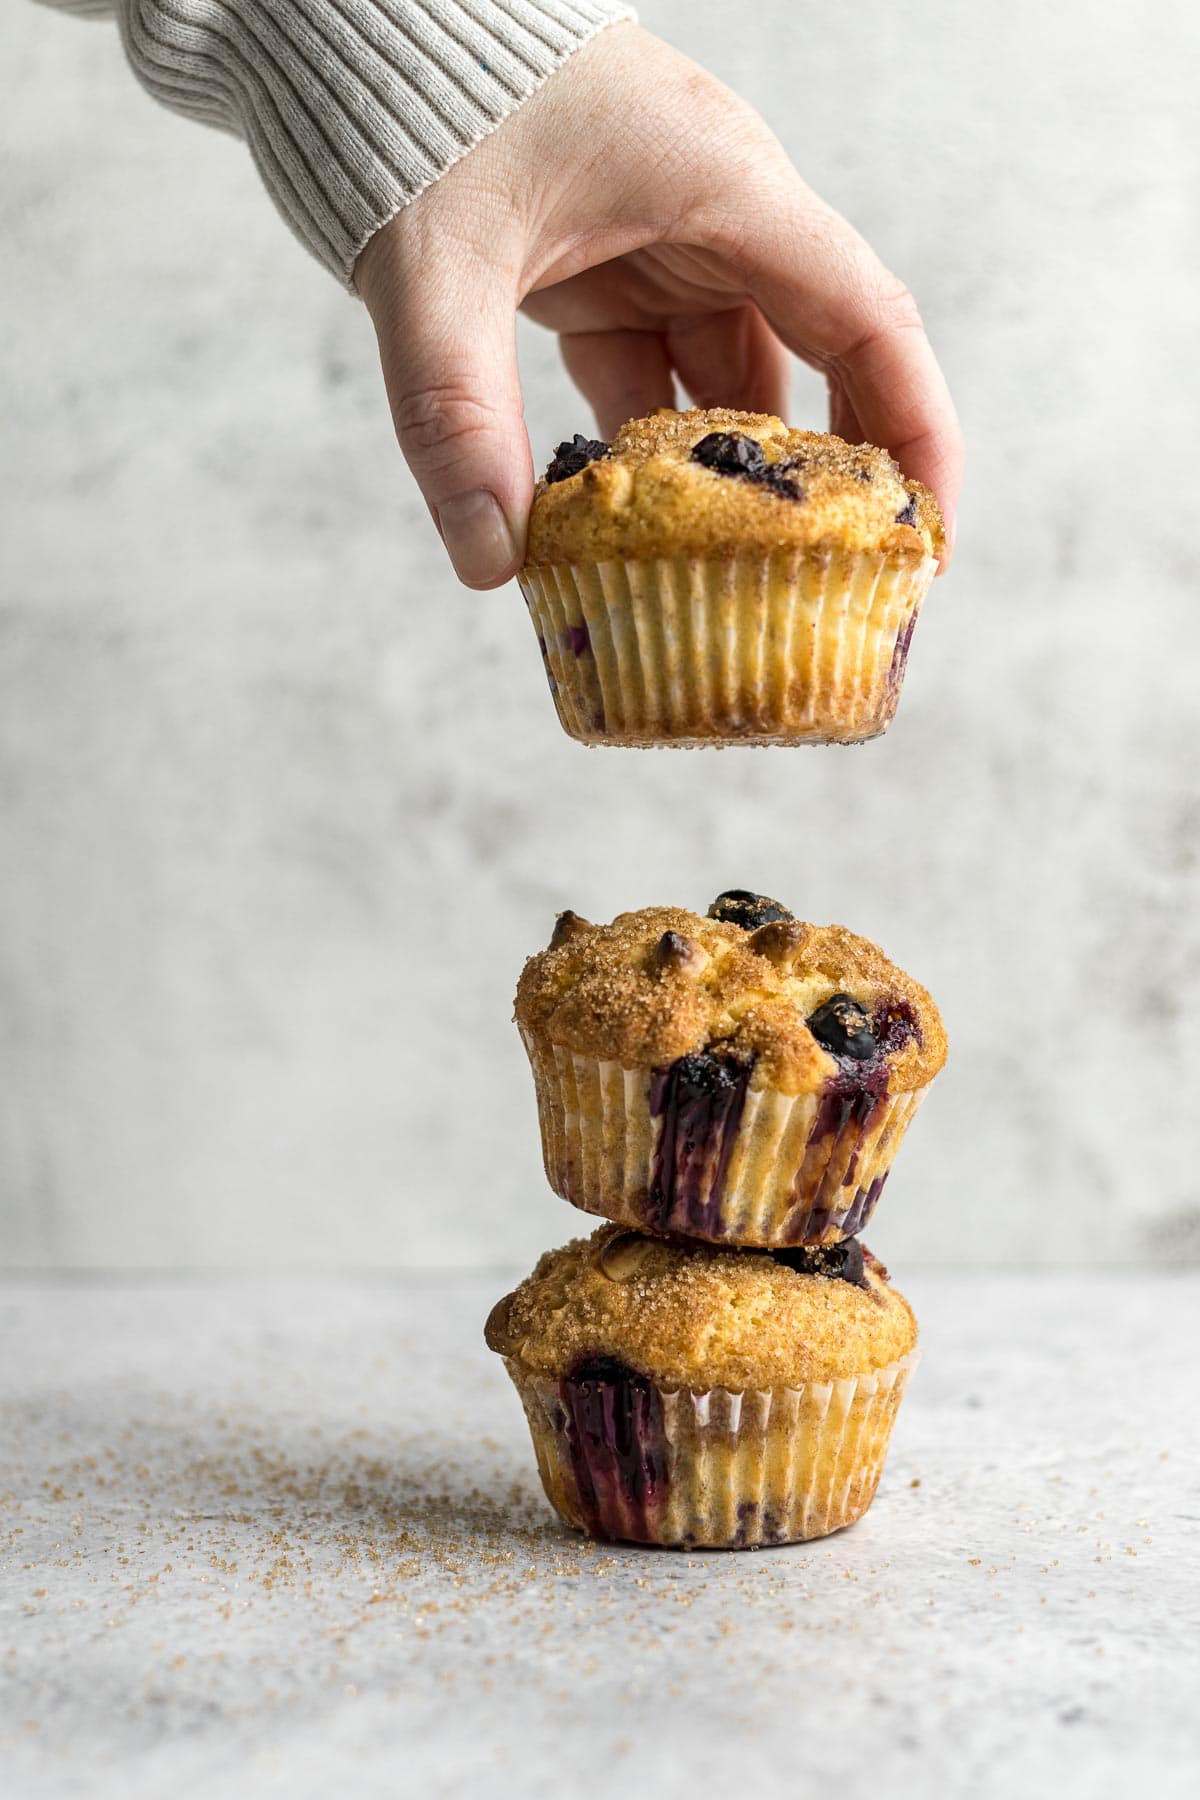 Stacked blueberry and white chocolate muffins with the top one being held by a hand